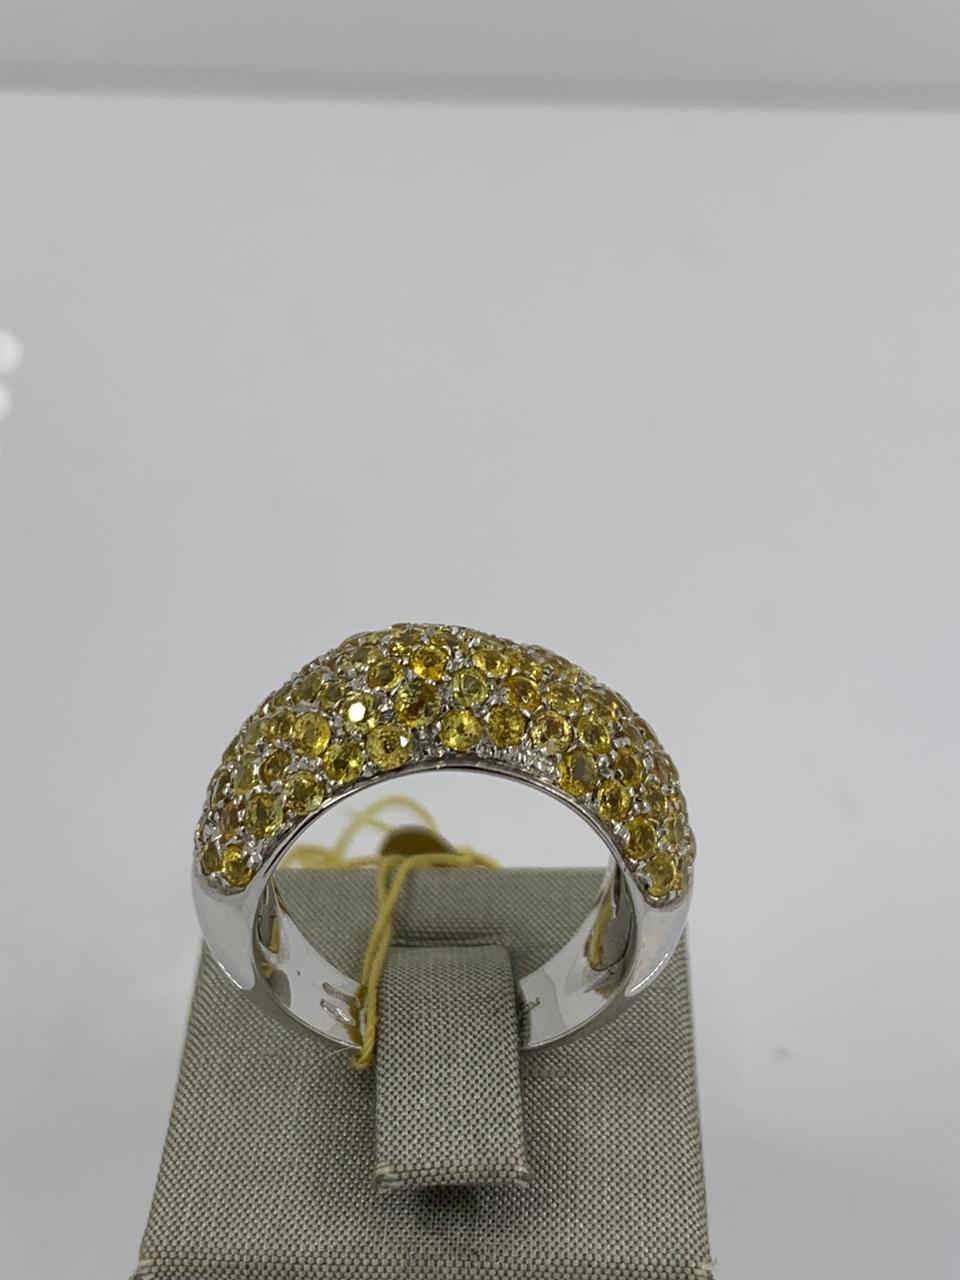 Koesis Ring in 18kt White Gold with Yellow Sapphires (4.16ct) size 6.5